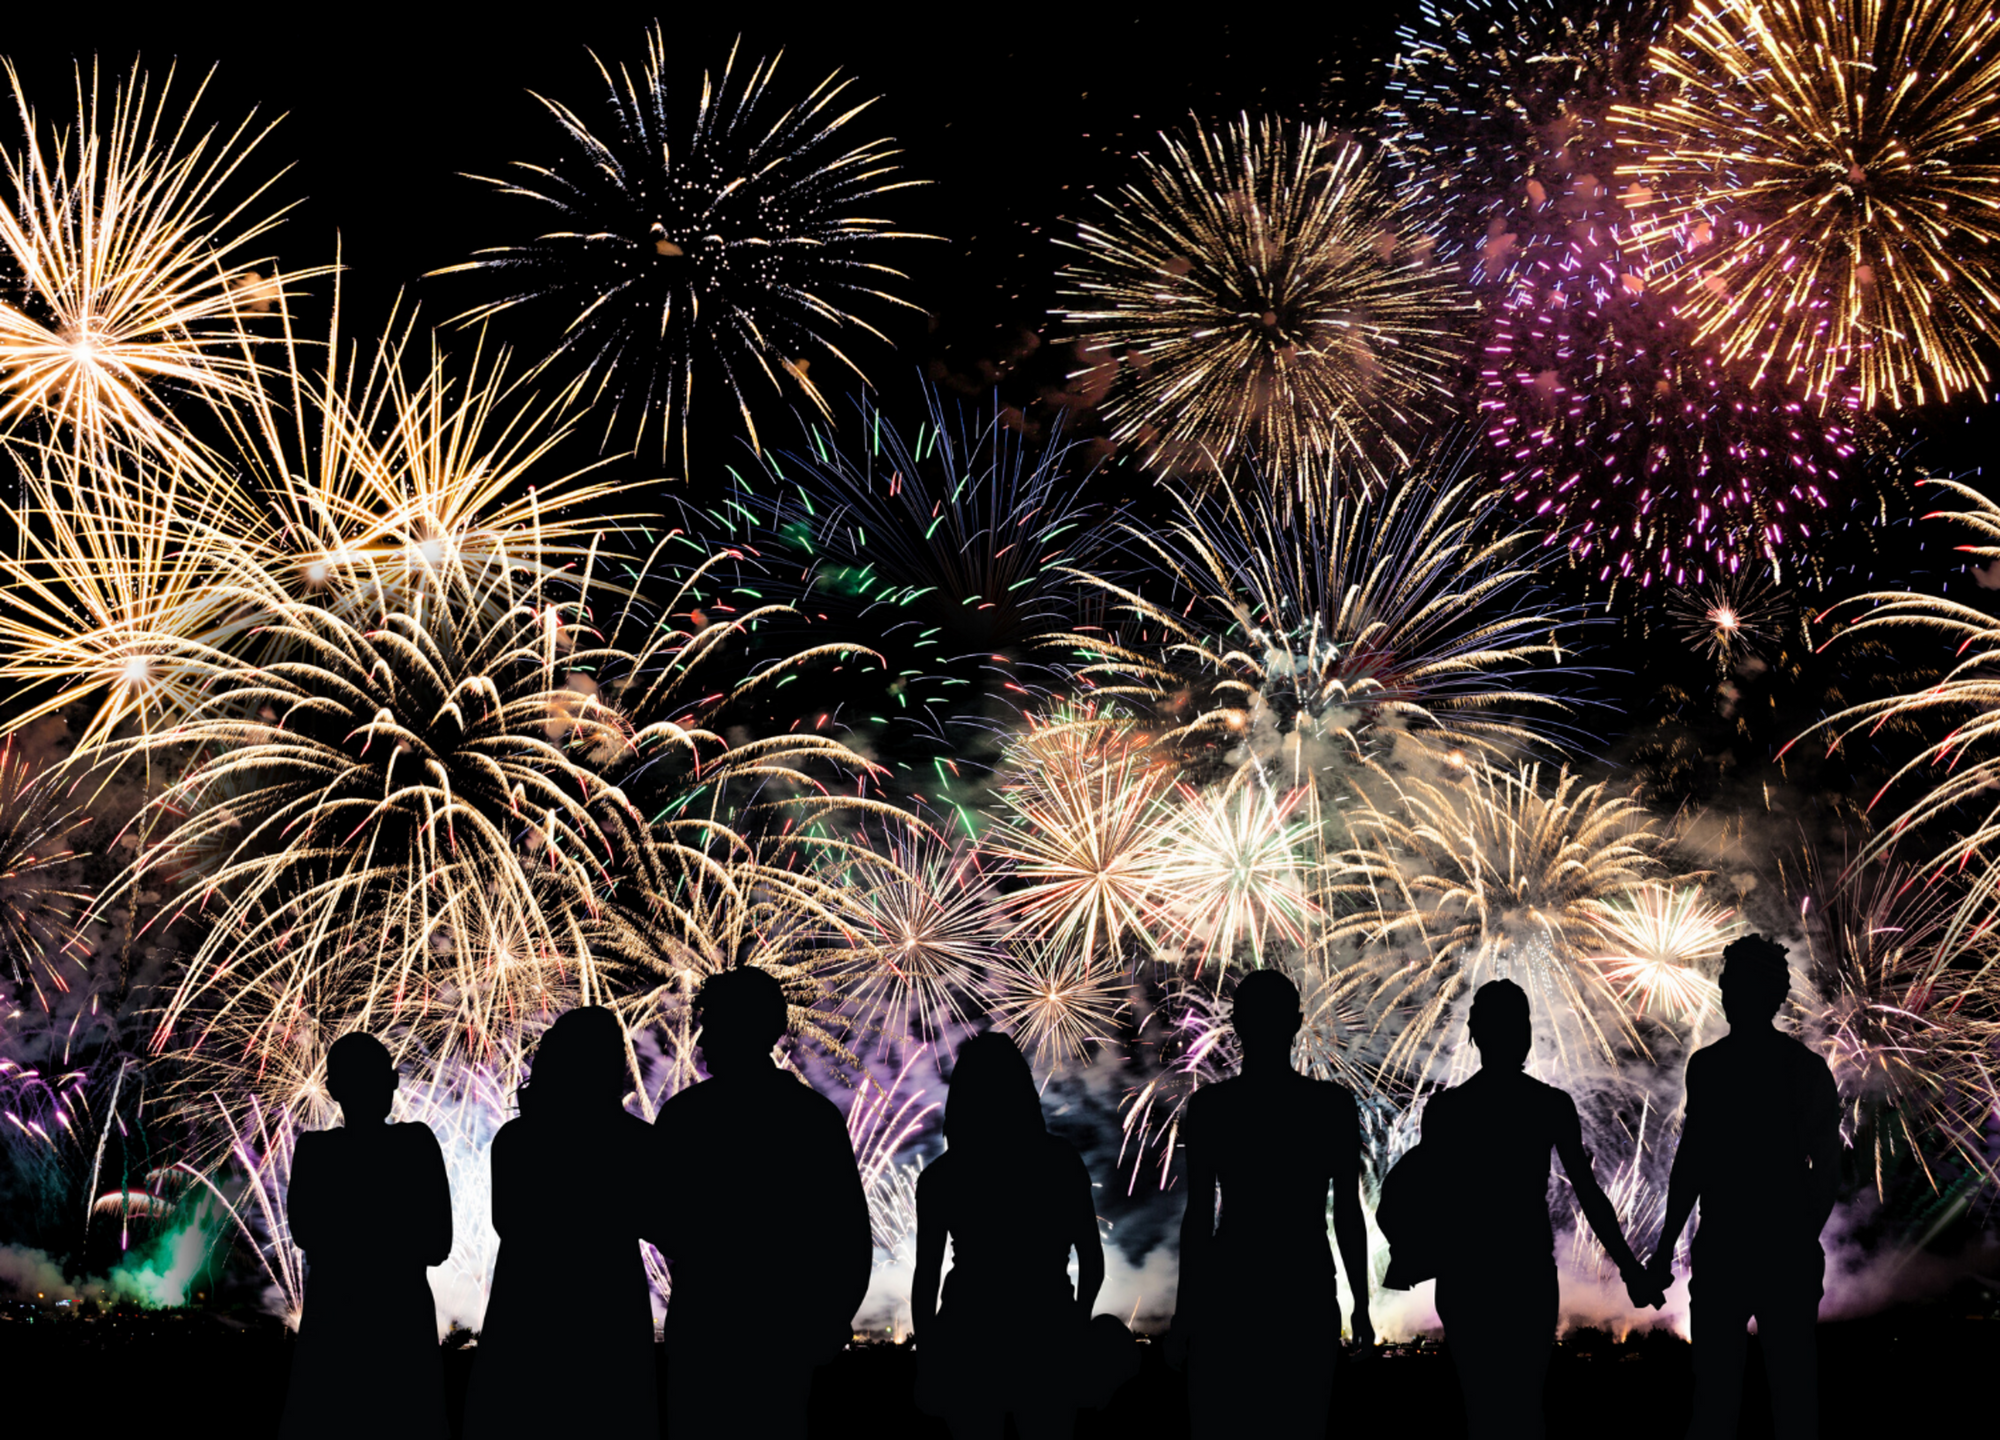 14 Tips on How To Photograph Fireworks